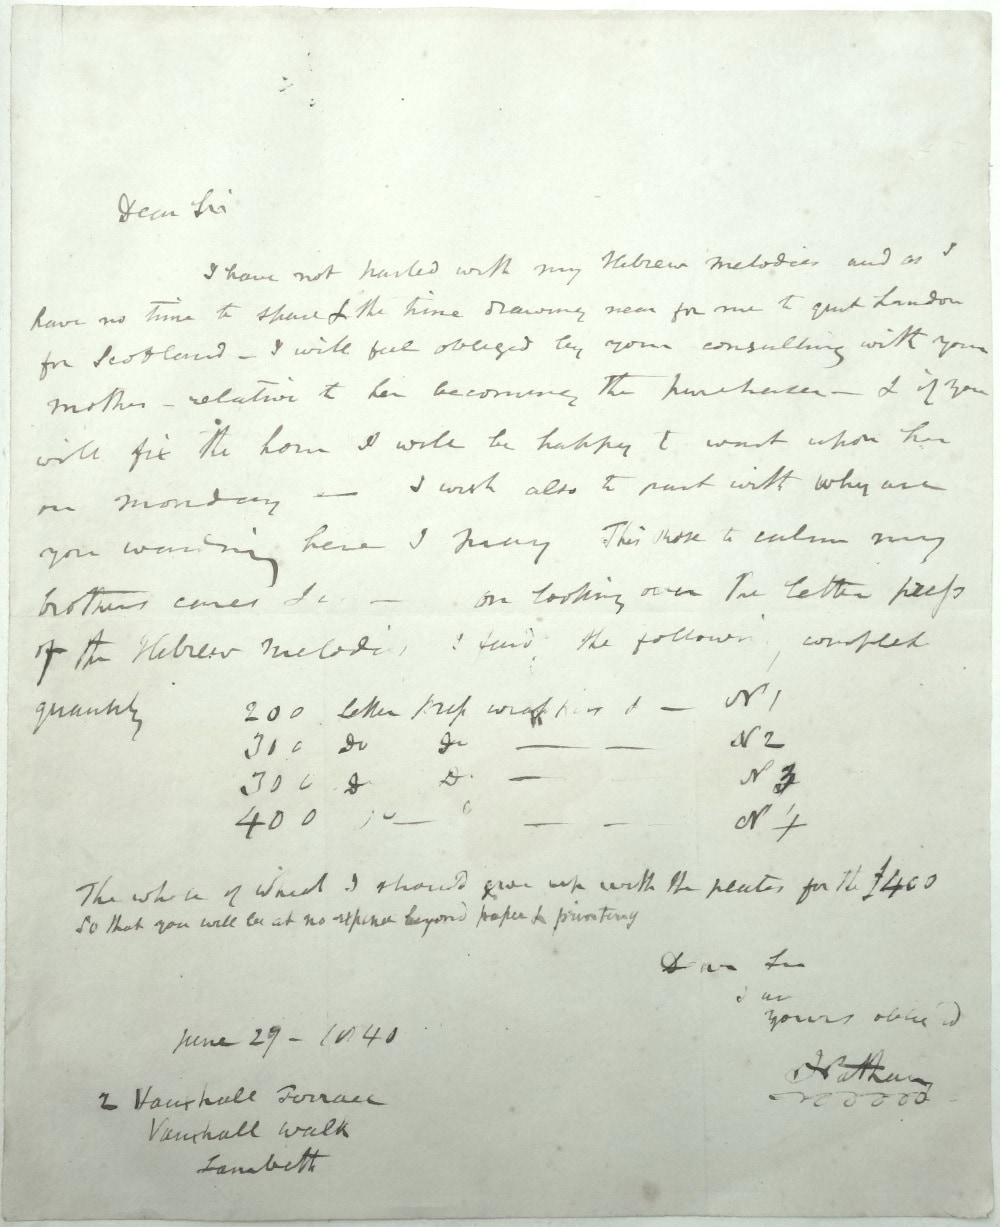 Isaac Nathan, letter to an unknown correspondent [probably Henry Fentum], Lambeth, 29 June 1840; State Library of New South Wales, MLMSS 5912